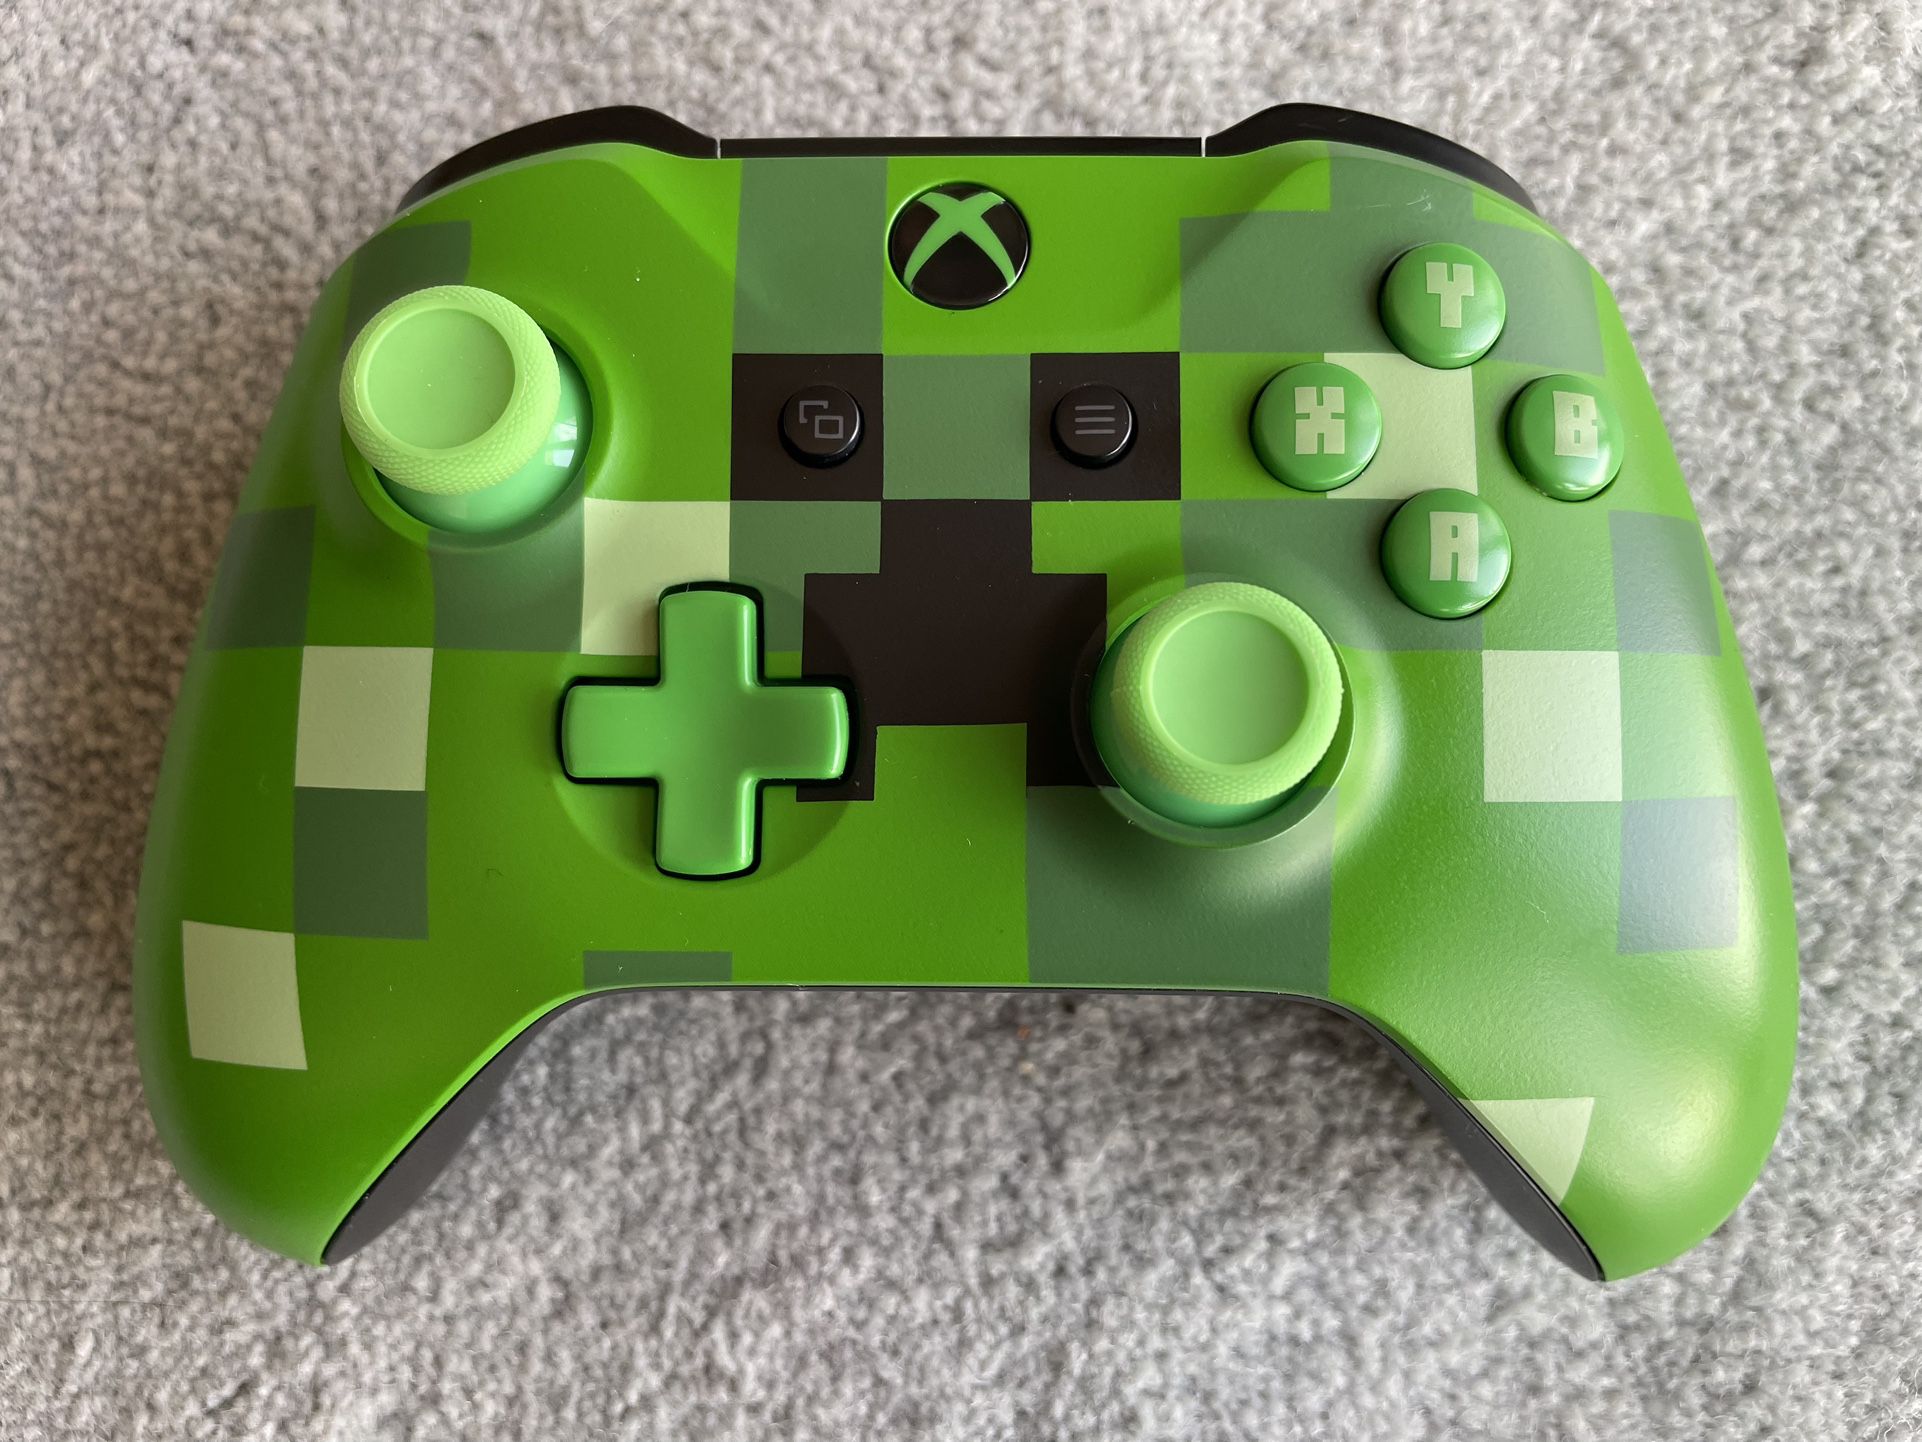 Minecraft Creeper controller for Xbox One